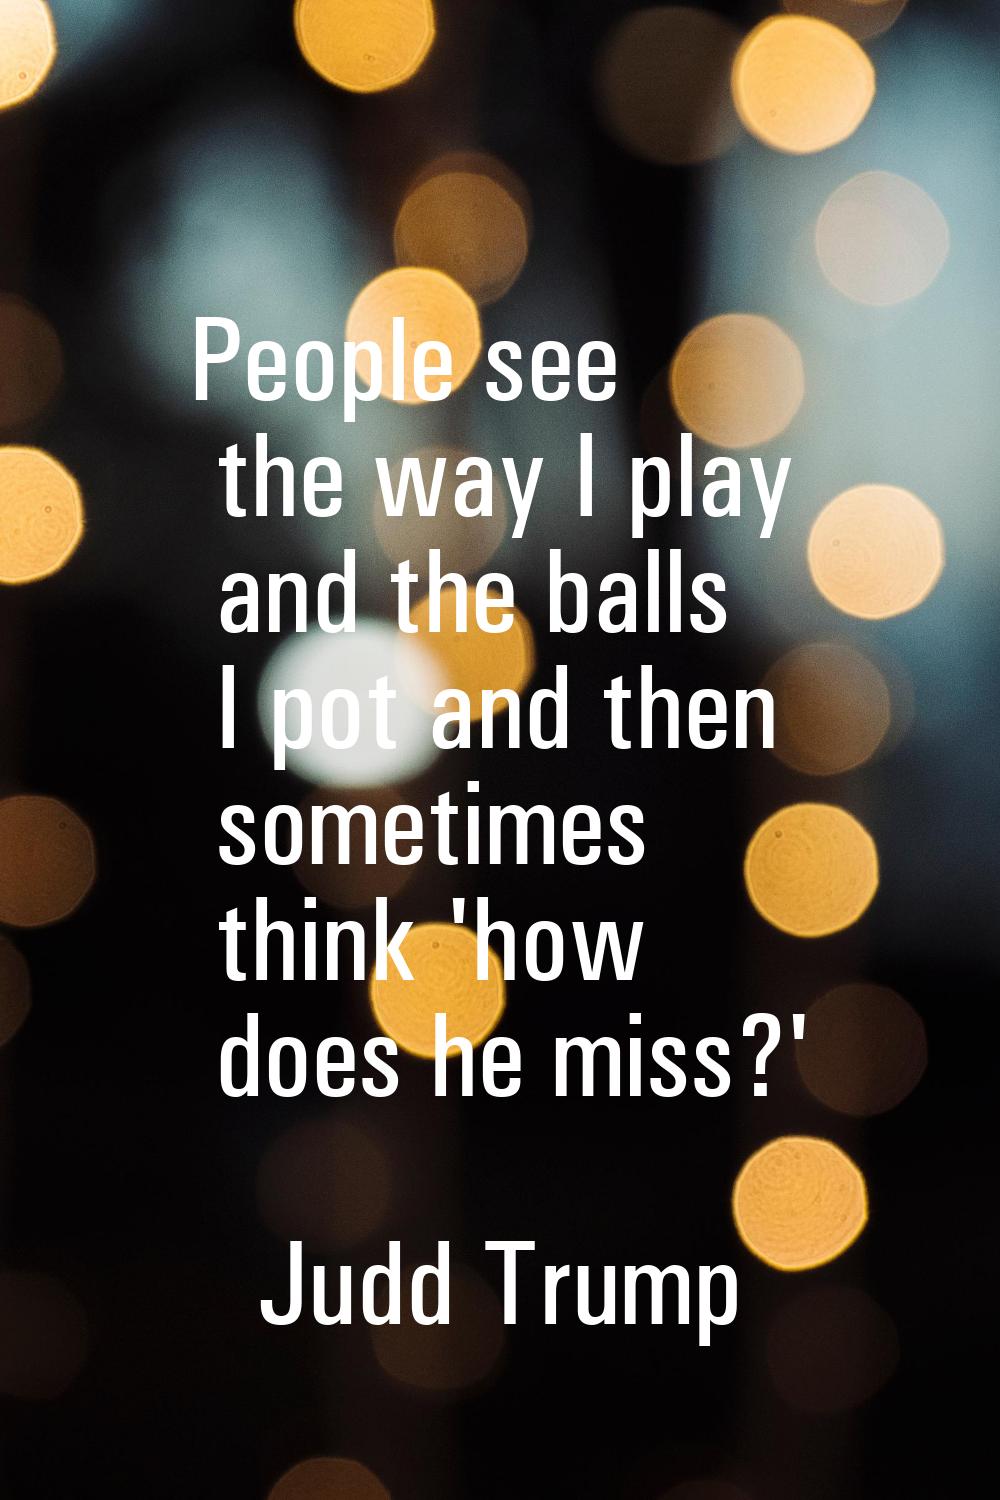 People see the way I play and the balls I pot and then sometimes think 'how does he miss?'